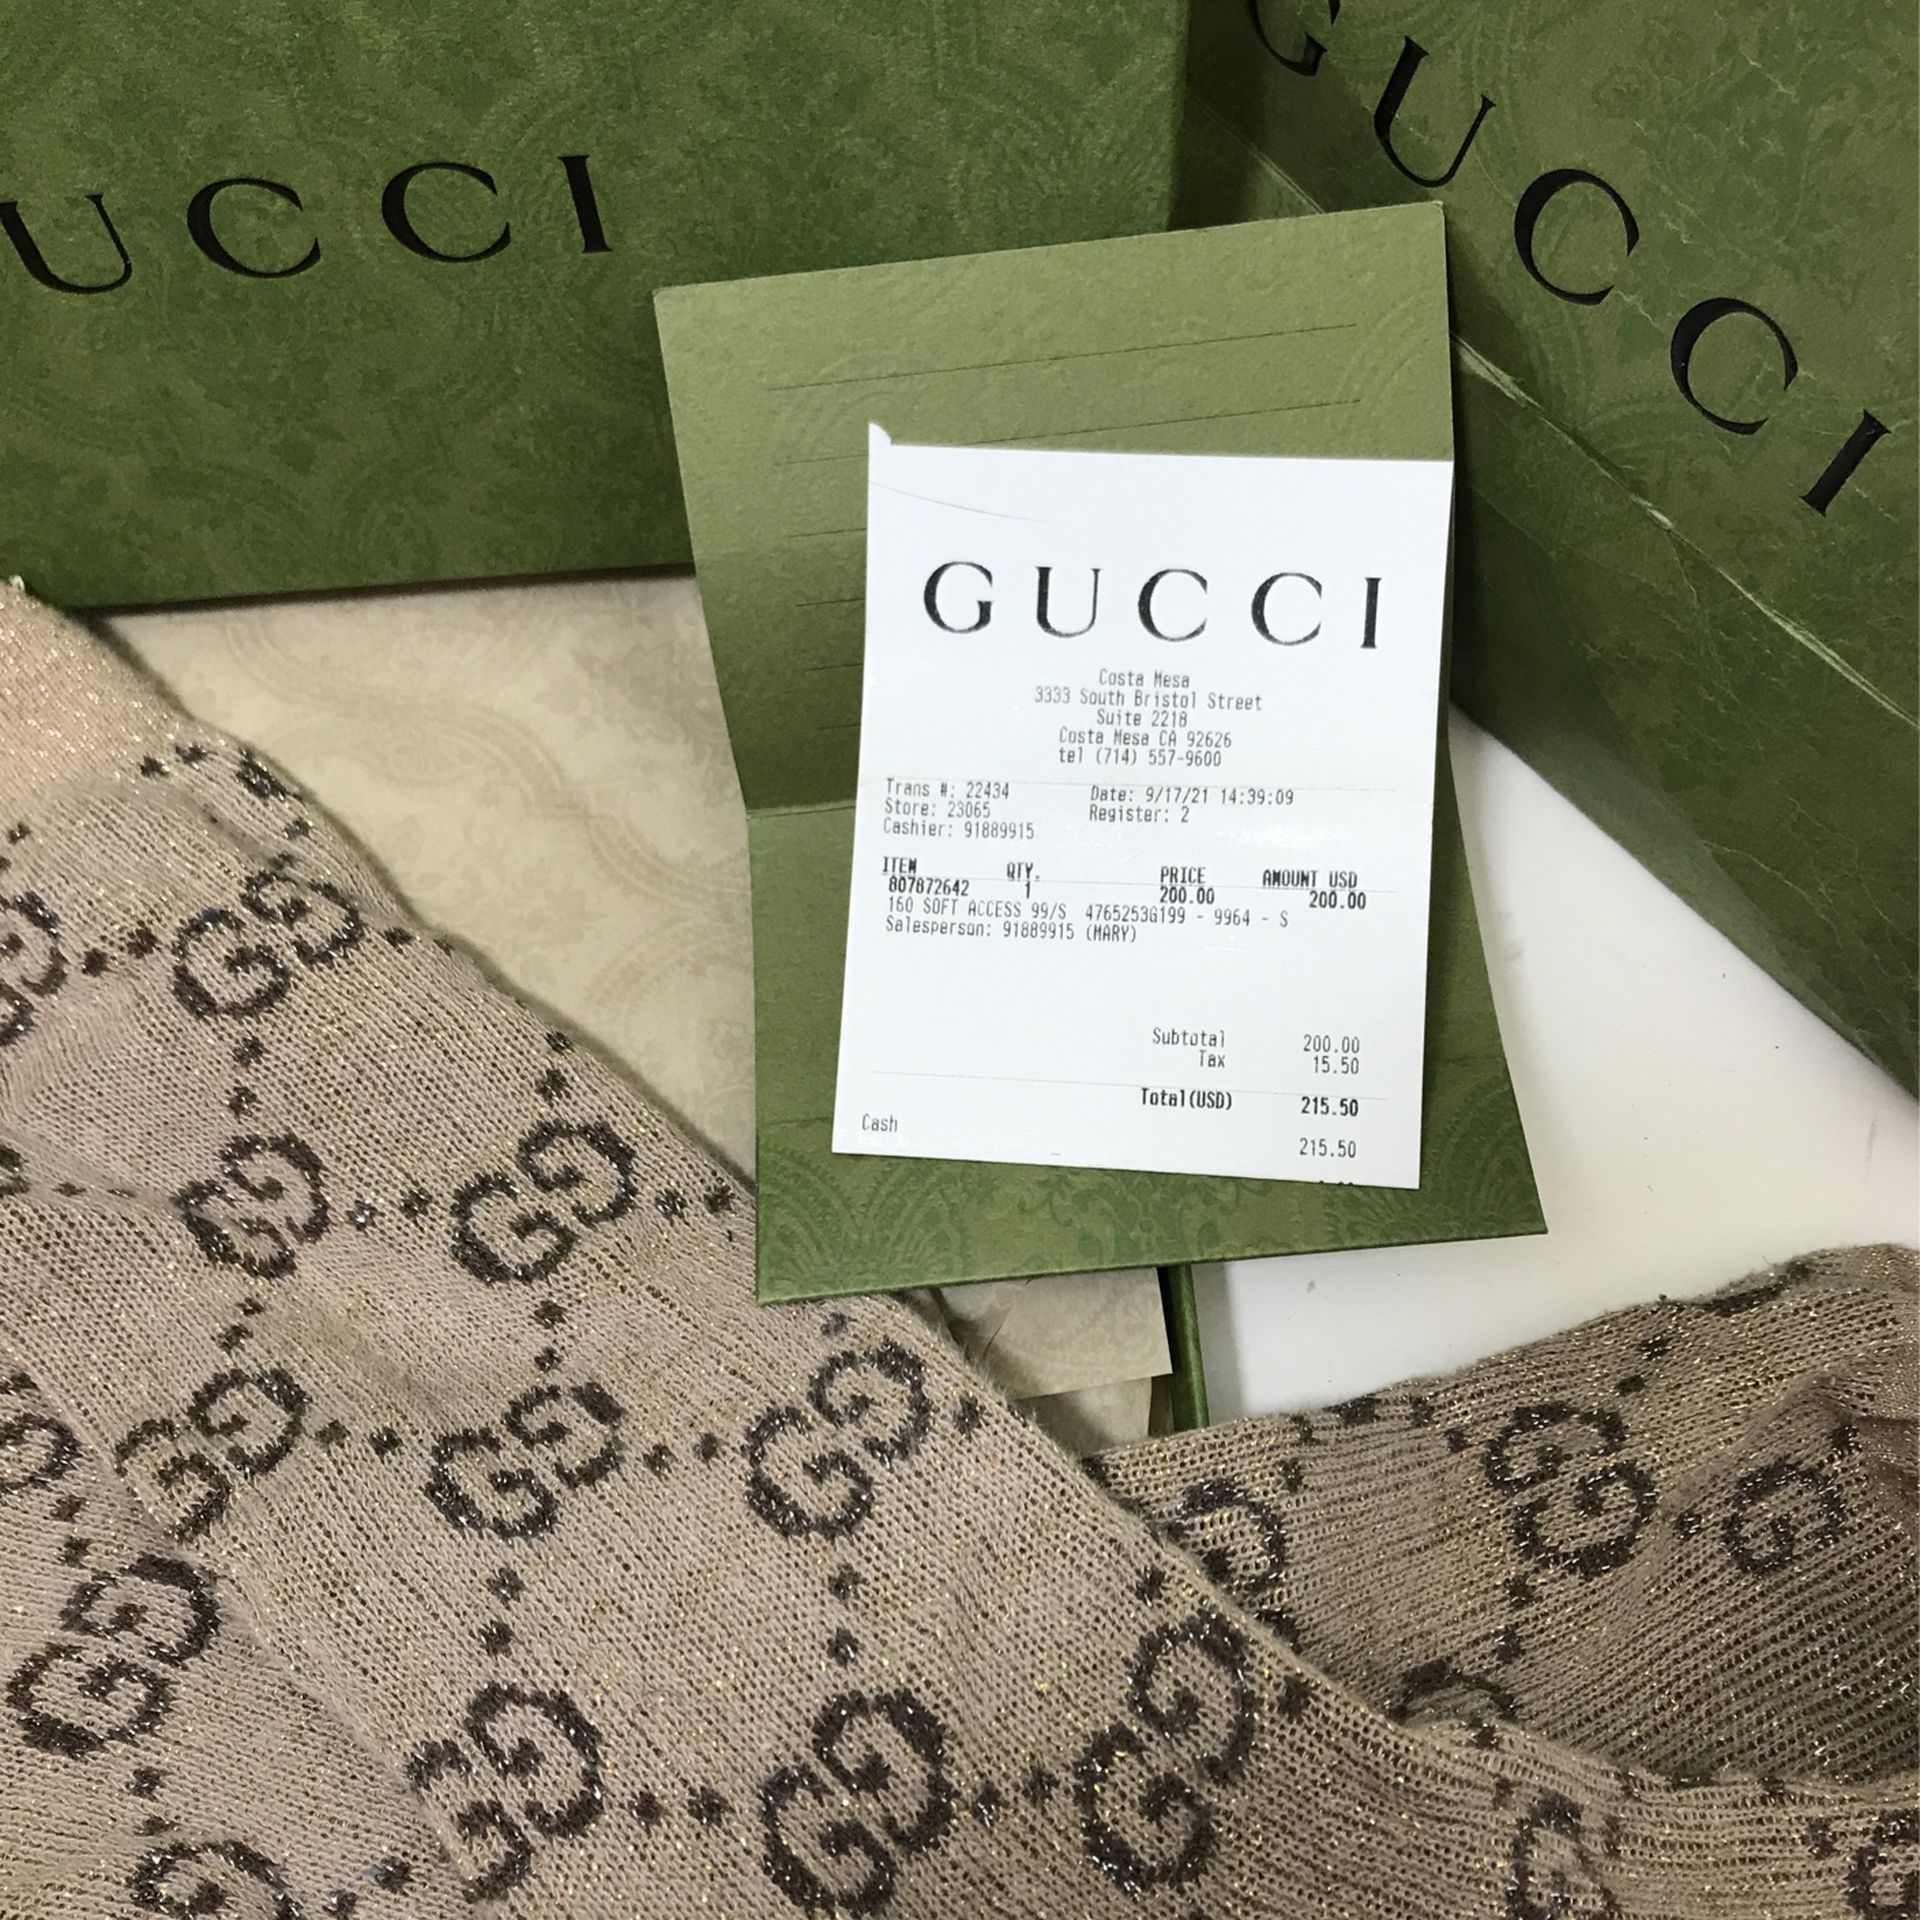 BRAND NEW GUCCI SOCKS FOR SALE 100% authentic Gucci - Depop